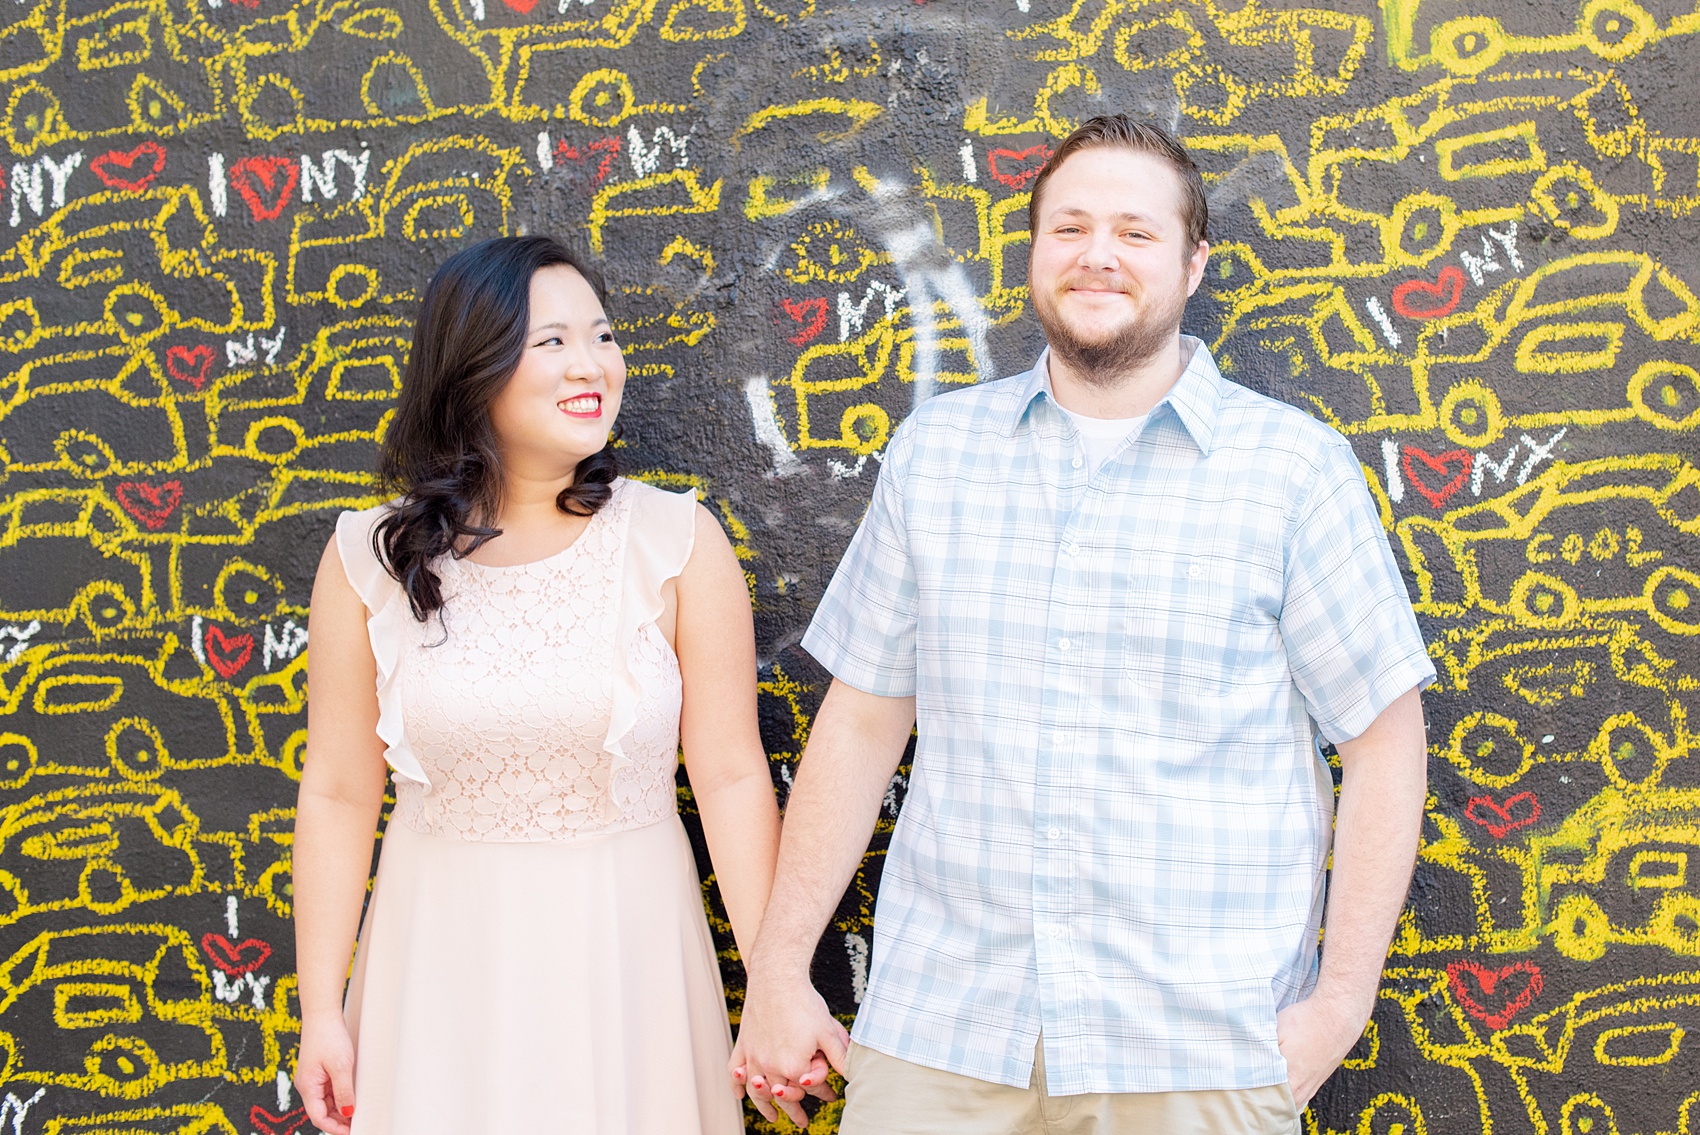 Engagement photos and colorful ideas for a shoot in the Lower East Side by Mikkel Paige Photography. These creative pictures with an interracial couple in an urban environment in downtown NYC will have you wanting to see more...so be sure to click through to see the entire shoot! #mikkelpaige #EngagementPhotos #engagementshoot #EngagementPictures